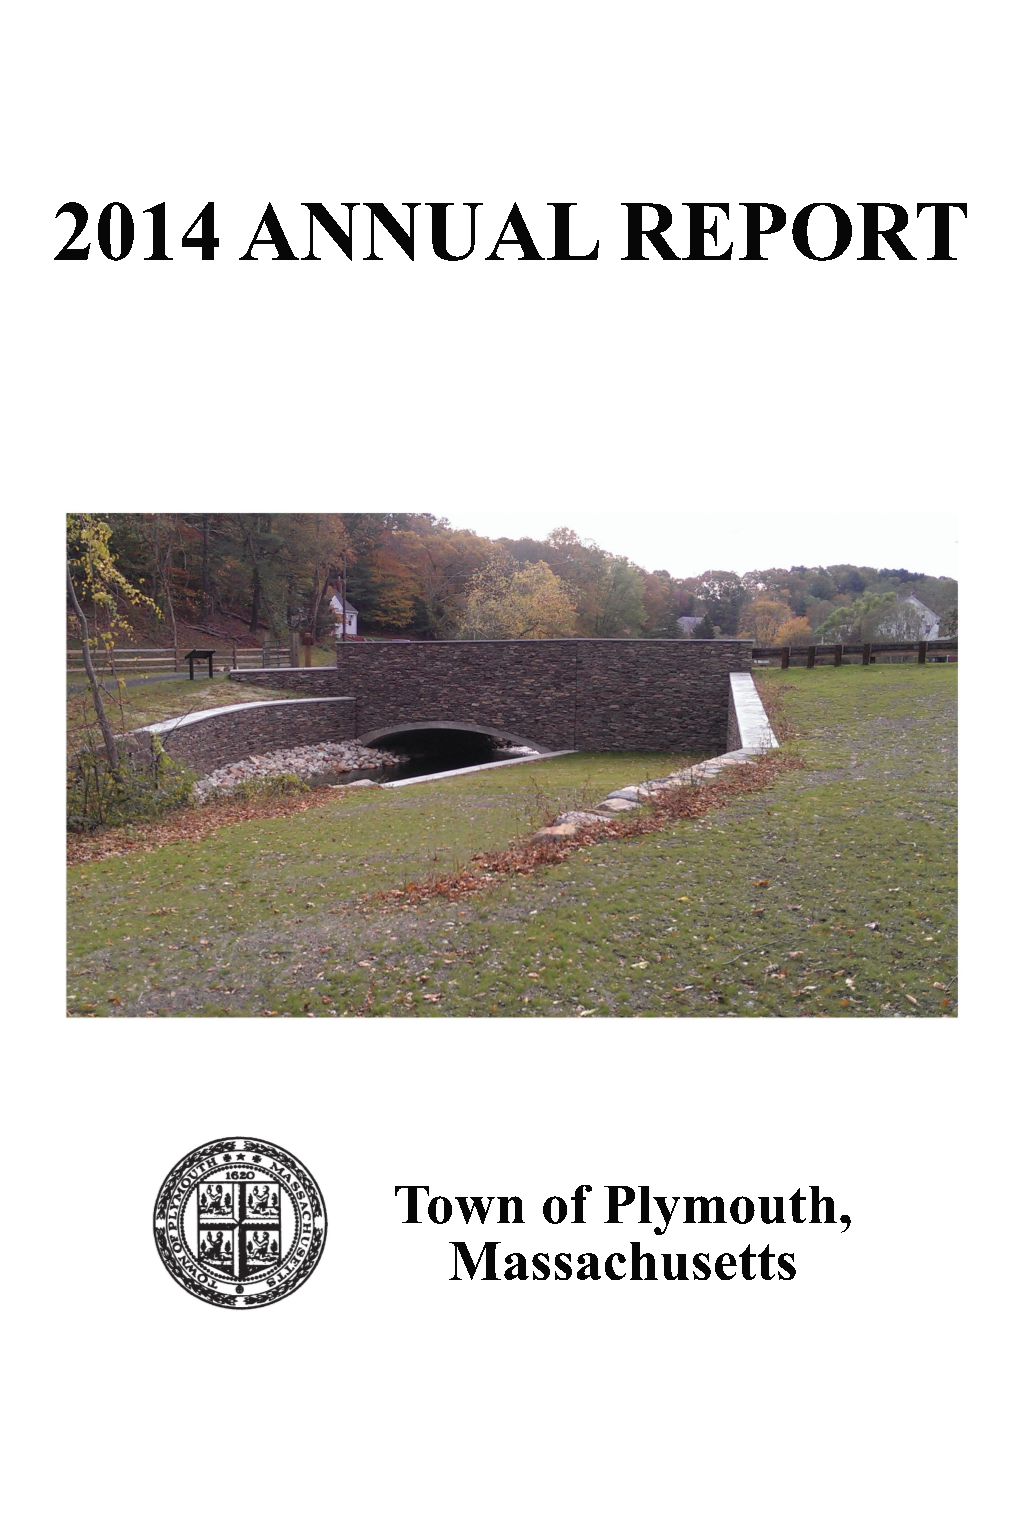 ANNUAL REPORT of the Town of Plymouth Massachusetts